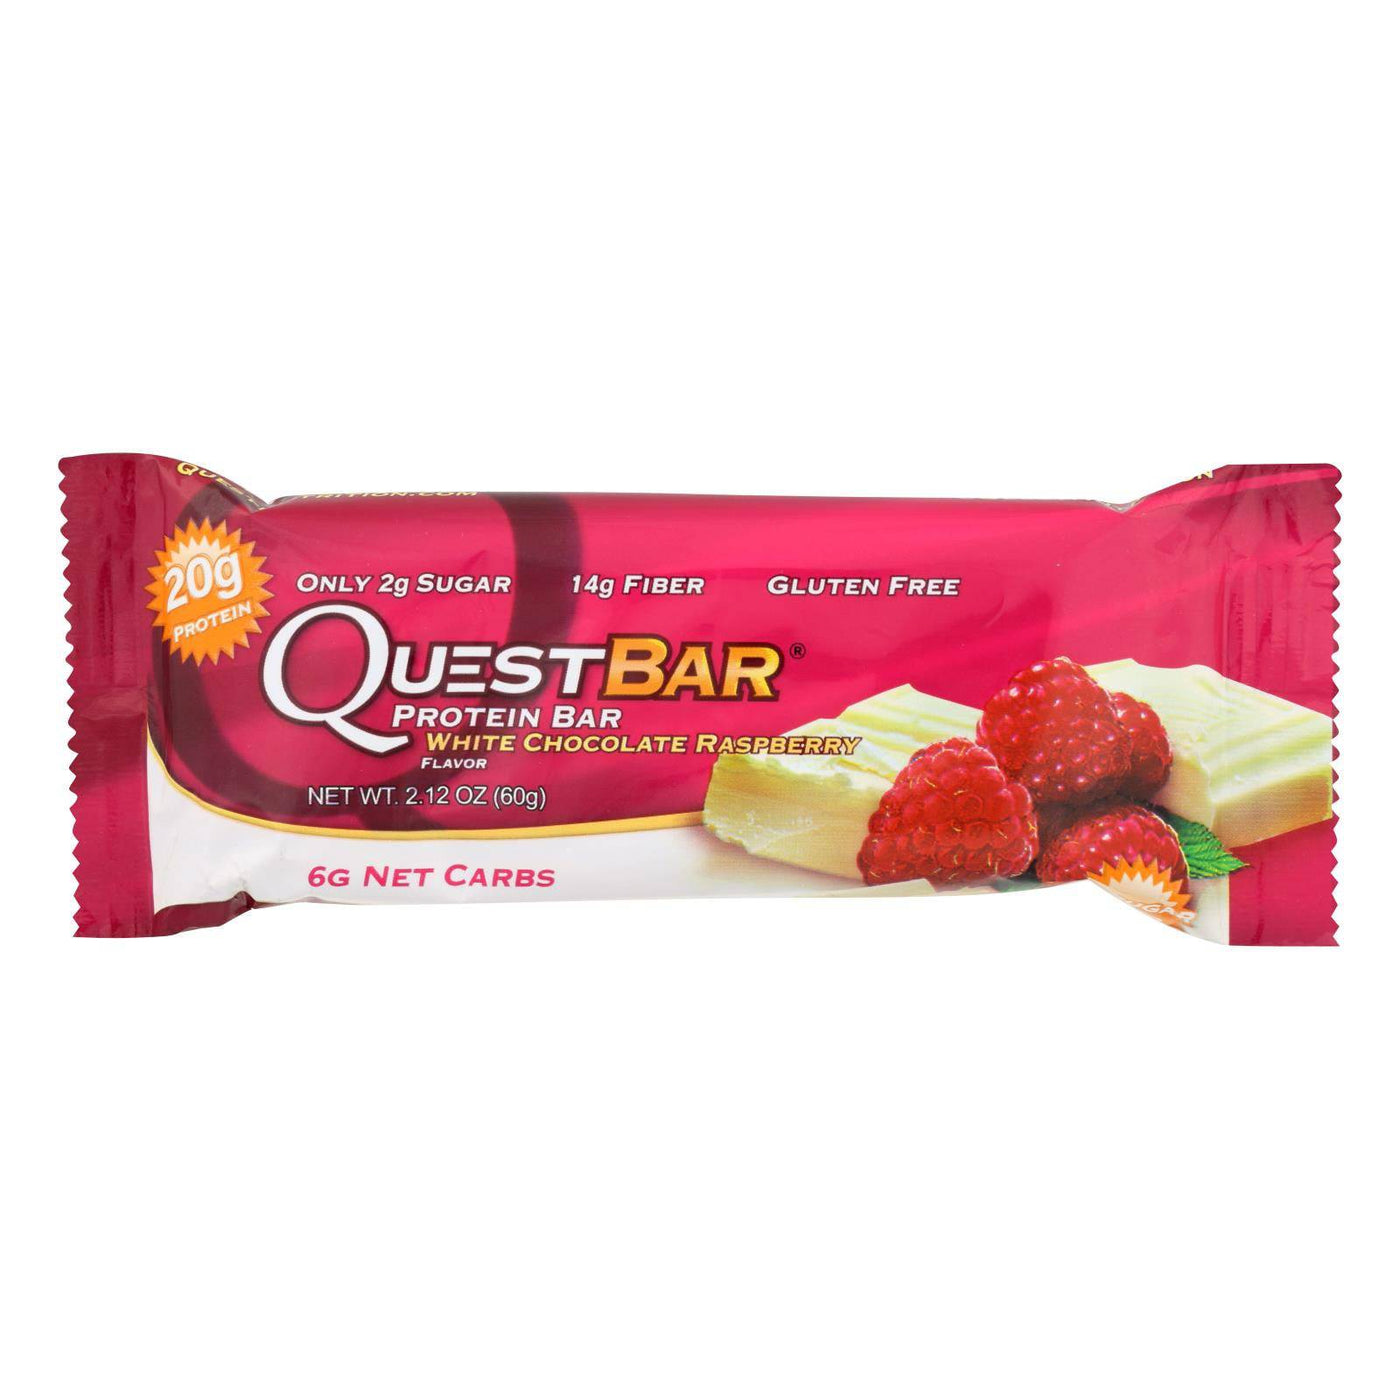 Buy Quest Bar - White Chocolate Raspberry - 2.12 Oz - Case Of 12  at OnlyNaturals.us